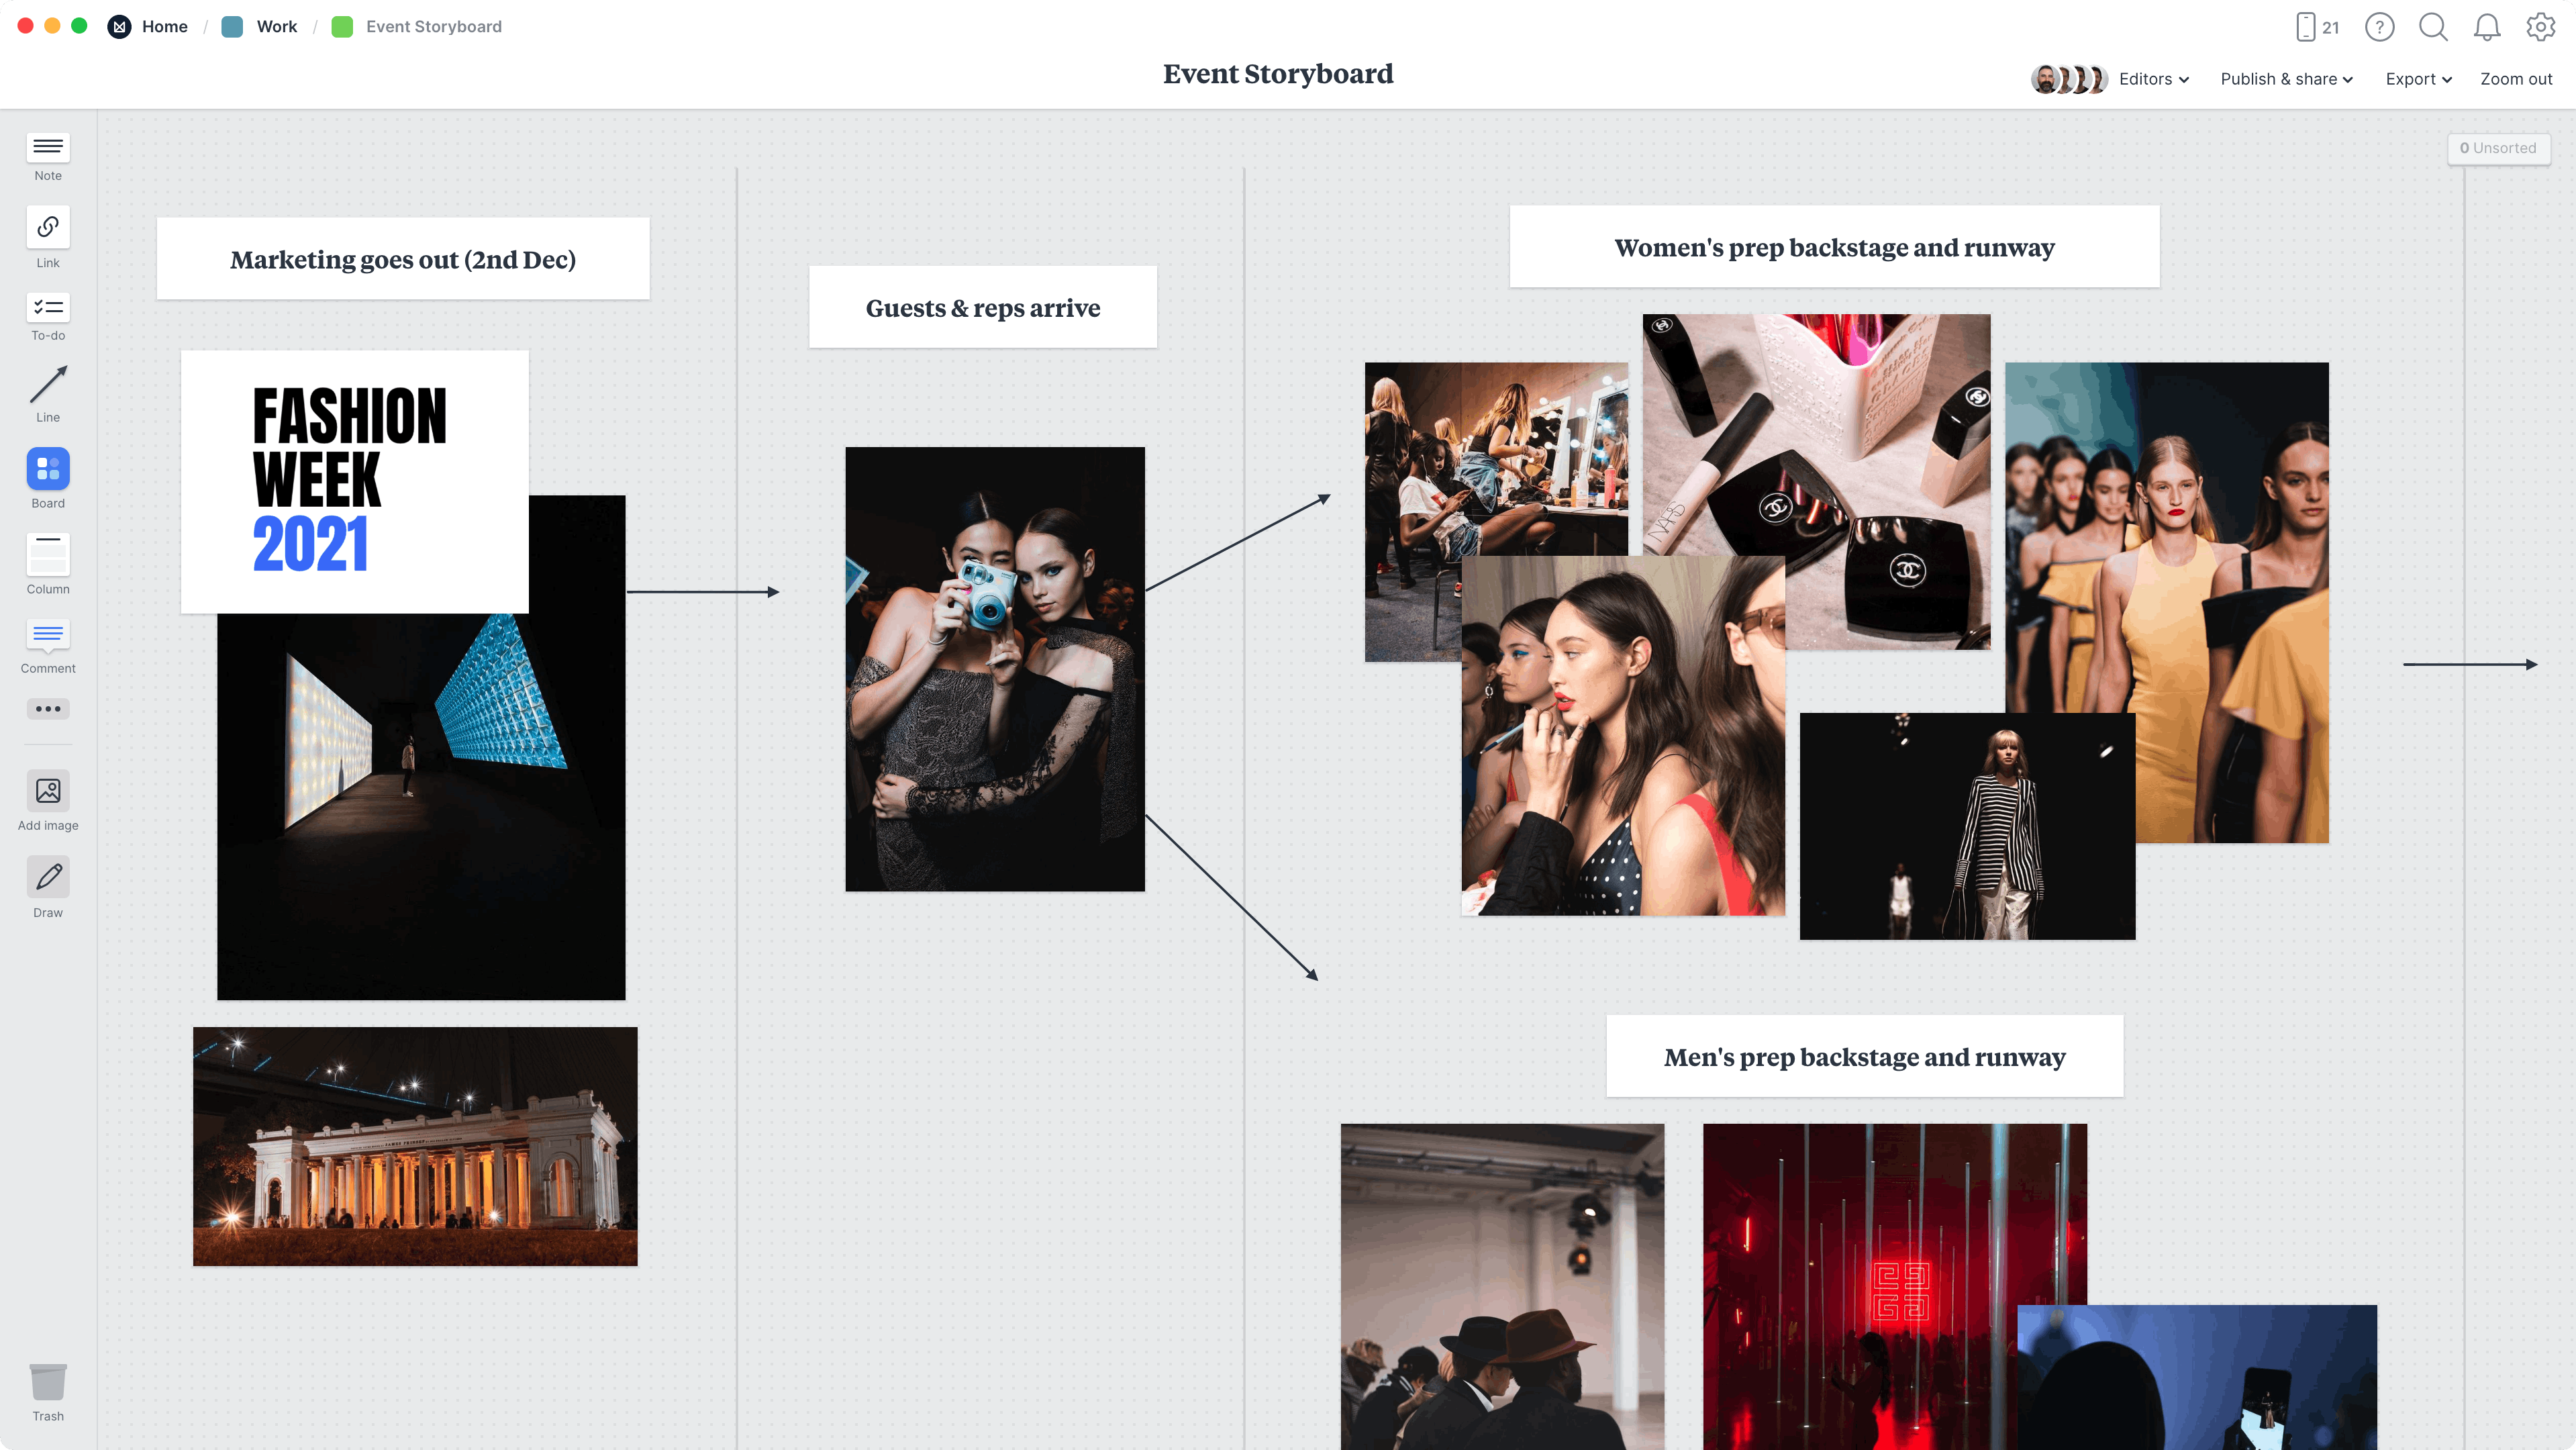 Event storyboard example